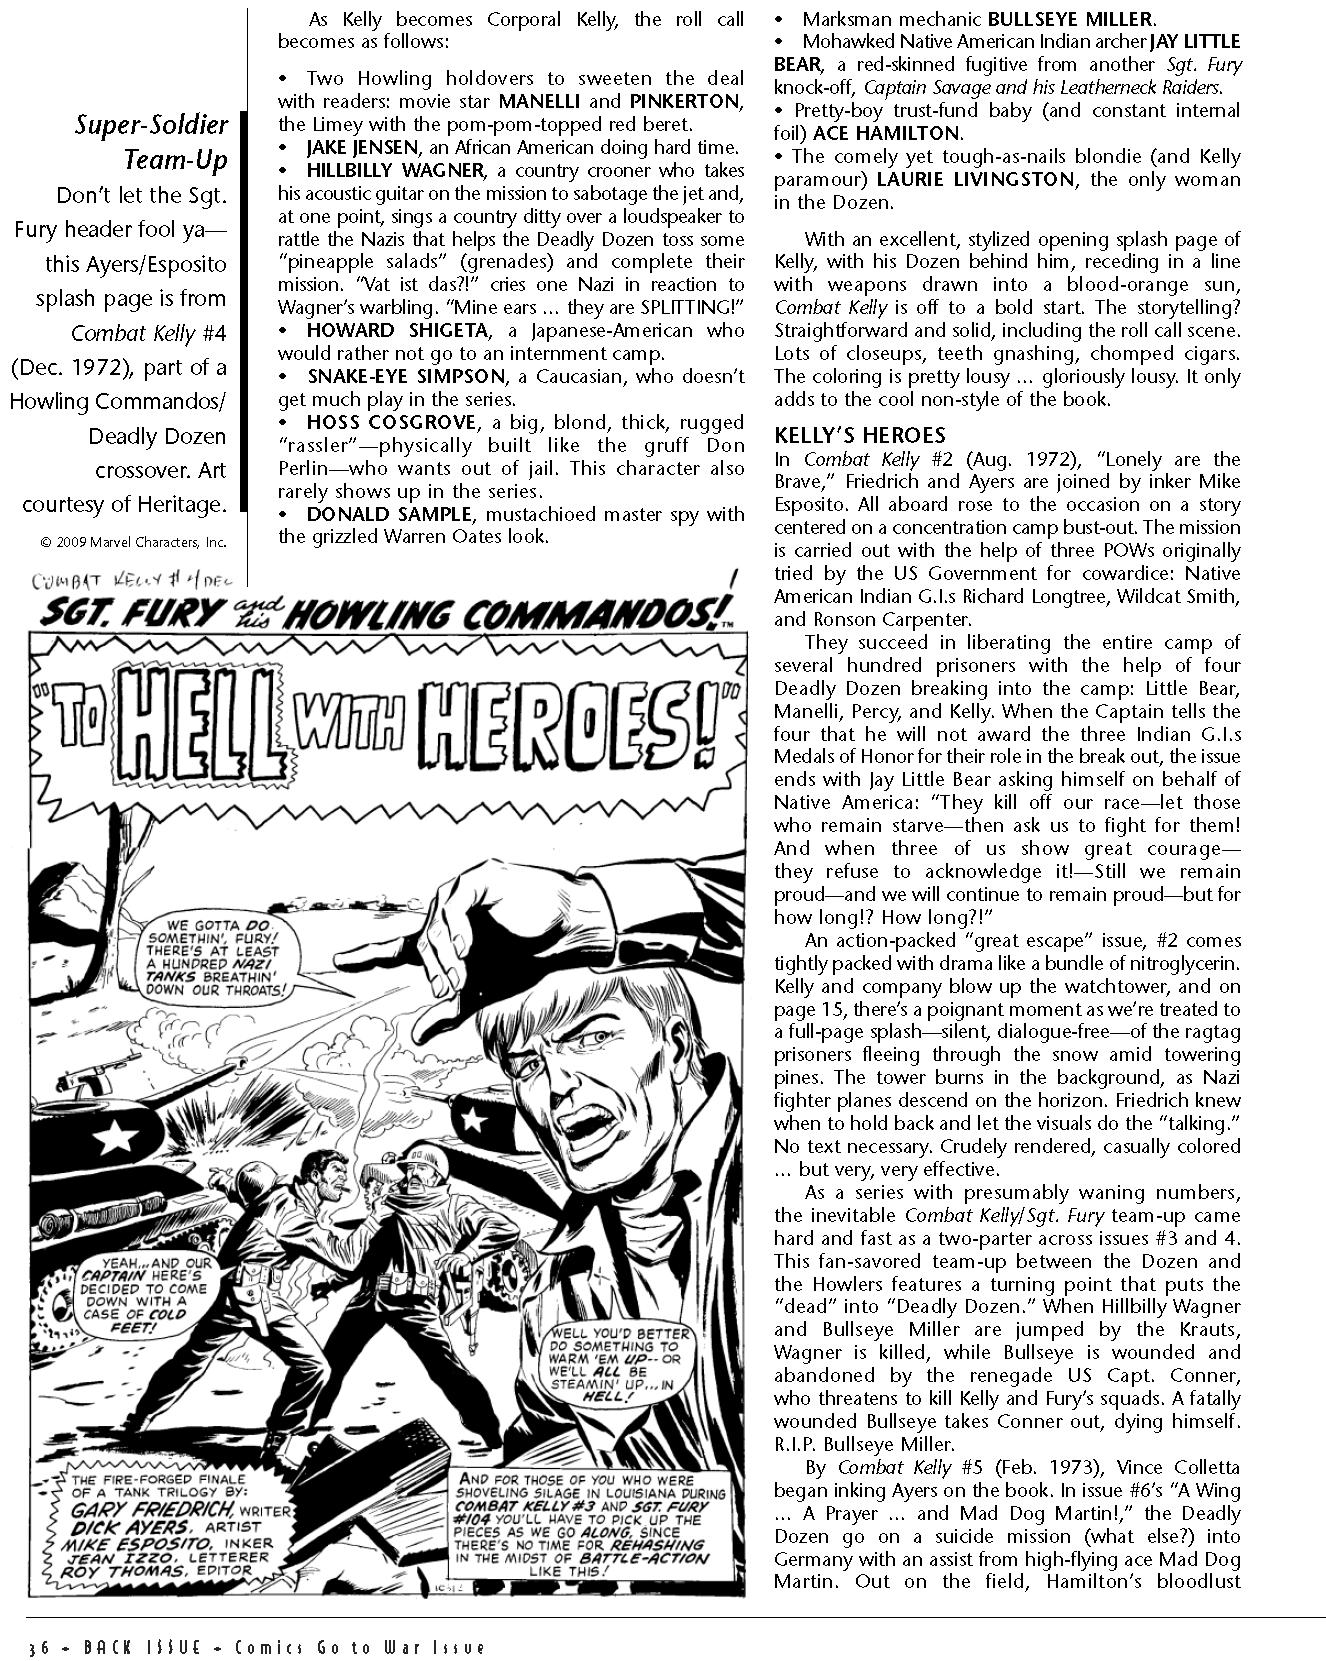 Read online Back Issue comic -  Issue #37 - 38